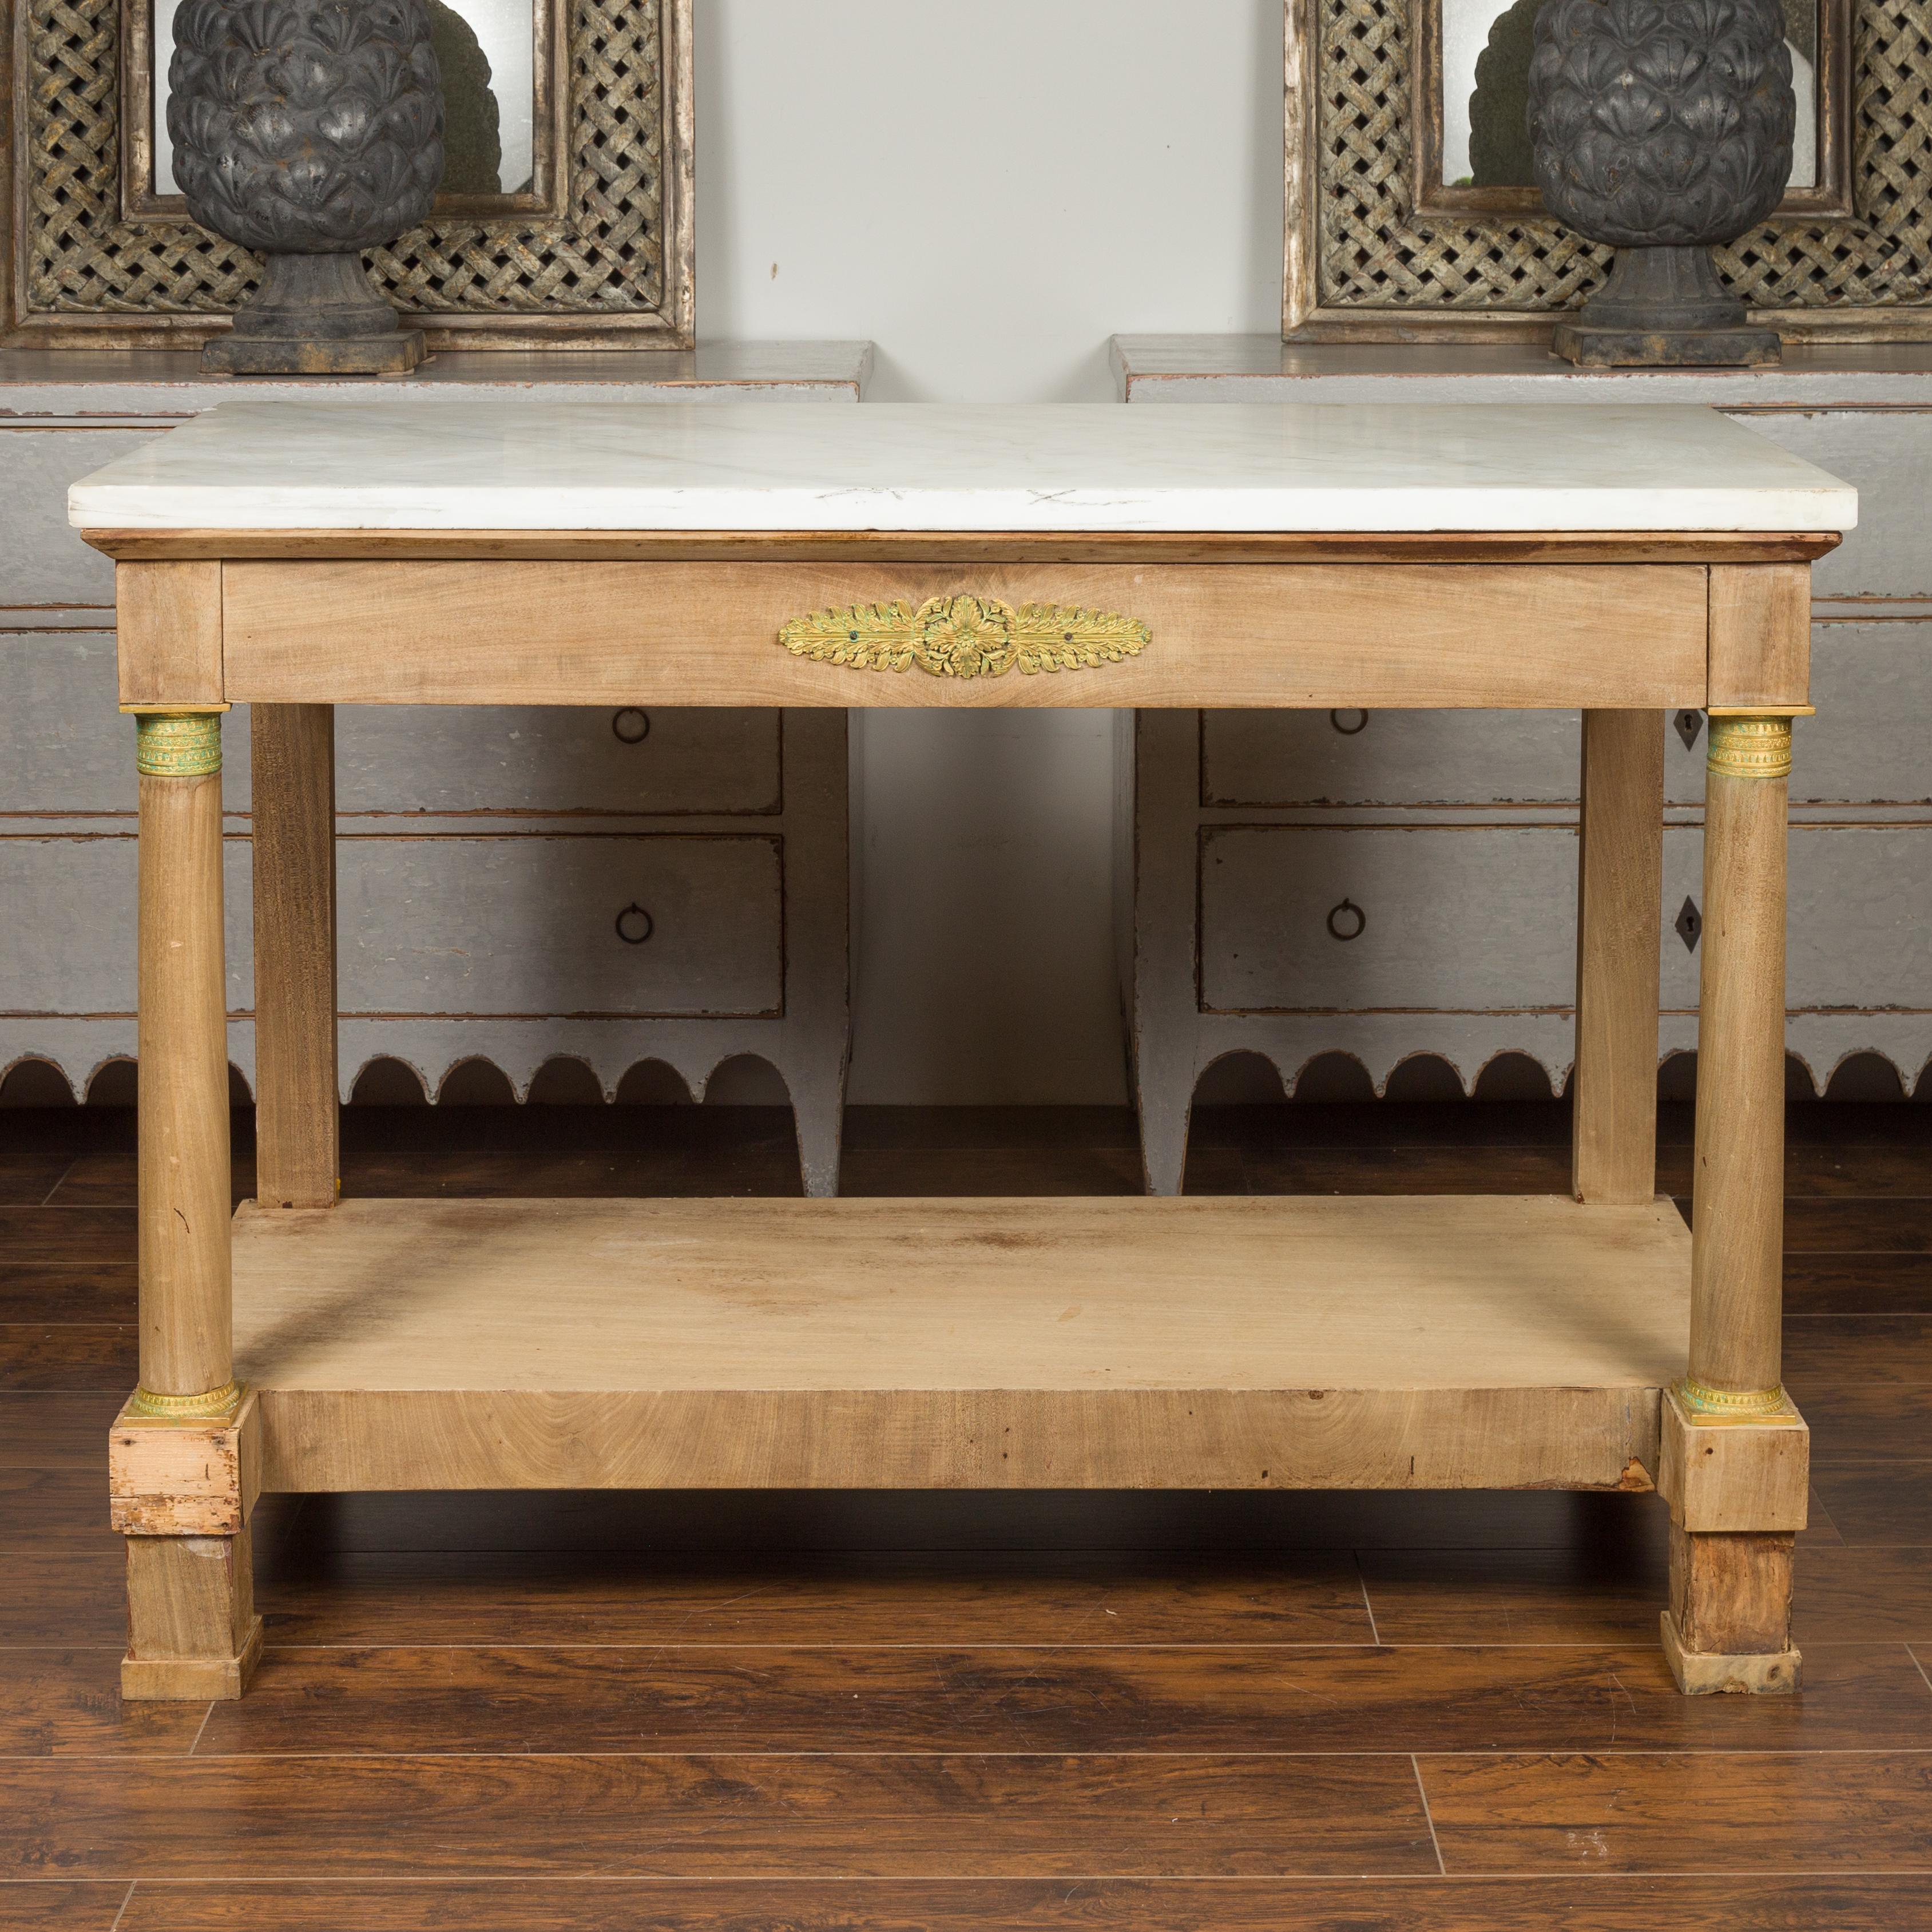 A French Empire style bleached wood console table from the mid-19th century, with white marble top and bronze accents. Born in France during the reign of Emperor Napoleon III, this console table presents the stylistic characteristics of the First